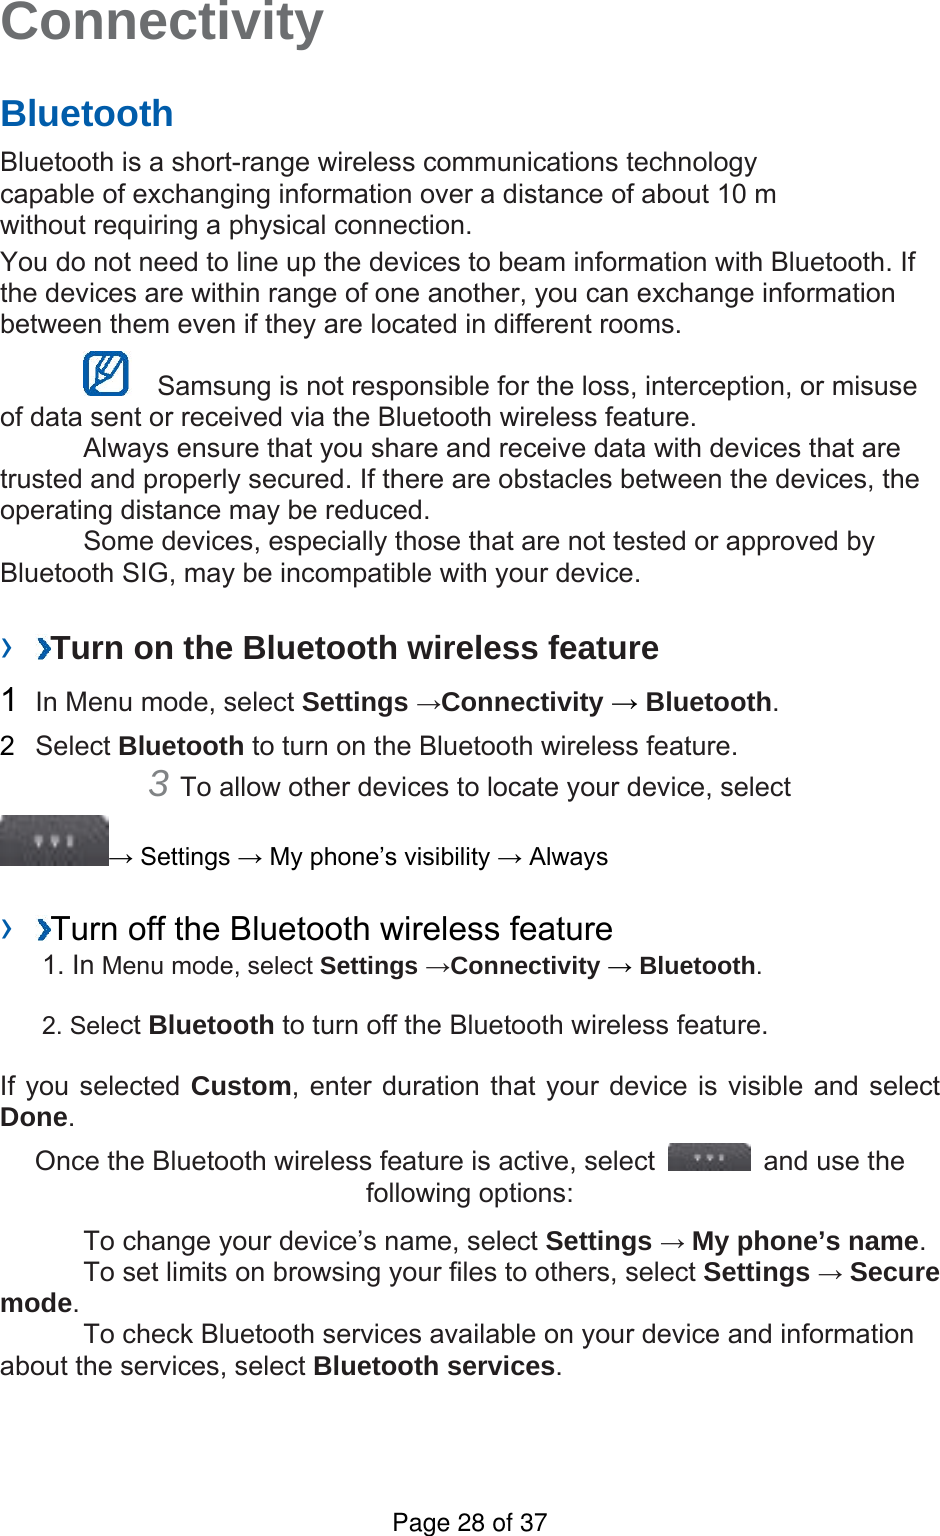 Connectivity   Bluetooth   Bluetooth is a short-range wireless communications technology capable of exchanging information over a distance of about 10 m without requiring a physical connection.   You do not need to line up the devices to beam information with Bluetooth. If the devices are within range of one another, you can exchange information between them even if they are located in different rooms.      Samsung is not responsible for the loss, interception, or misuse of data sent or received via the Bluetooth wireless feature.     Always ensure that you share and receive data with devices that are trusted and properly secured. If there are obstacles between the devices, the operating distance may be reduced.     Some devices, especially those that are not tested or approved by Bluetooth SIG, may be incompatible with your device.    ›  Turn on the Bluetooth wireless feature   1  In Menu mode, select Settings →Connectivity → Bluetooth.  2  Select Bluetooth to turn on the Bluetooth wireless feature.   3 To allow other devices to locate your device, select   → Settings → My phone’s visibility → Always    ›  Turn off the Bluetooth wireless feature   1. In Menu mode, select Settings →Connectivity → Bluetooth. 2. Select Bluetooth to turn off the Bluetooth wireless feature. If you selected Custom, enter duration that your device is visible and select Done.  Once the Bluetooth wireless feature is active, select    and use the following options:     To change your device’s name, select Settings → My phone’s name.    To set limits on browsing your files to others, select Settings → Secure mode.    To check Bluetooth services available on your device and information about the services, select Bluetooth services.   Page 28 of 37